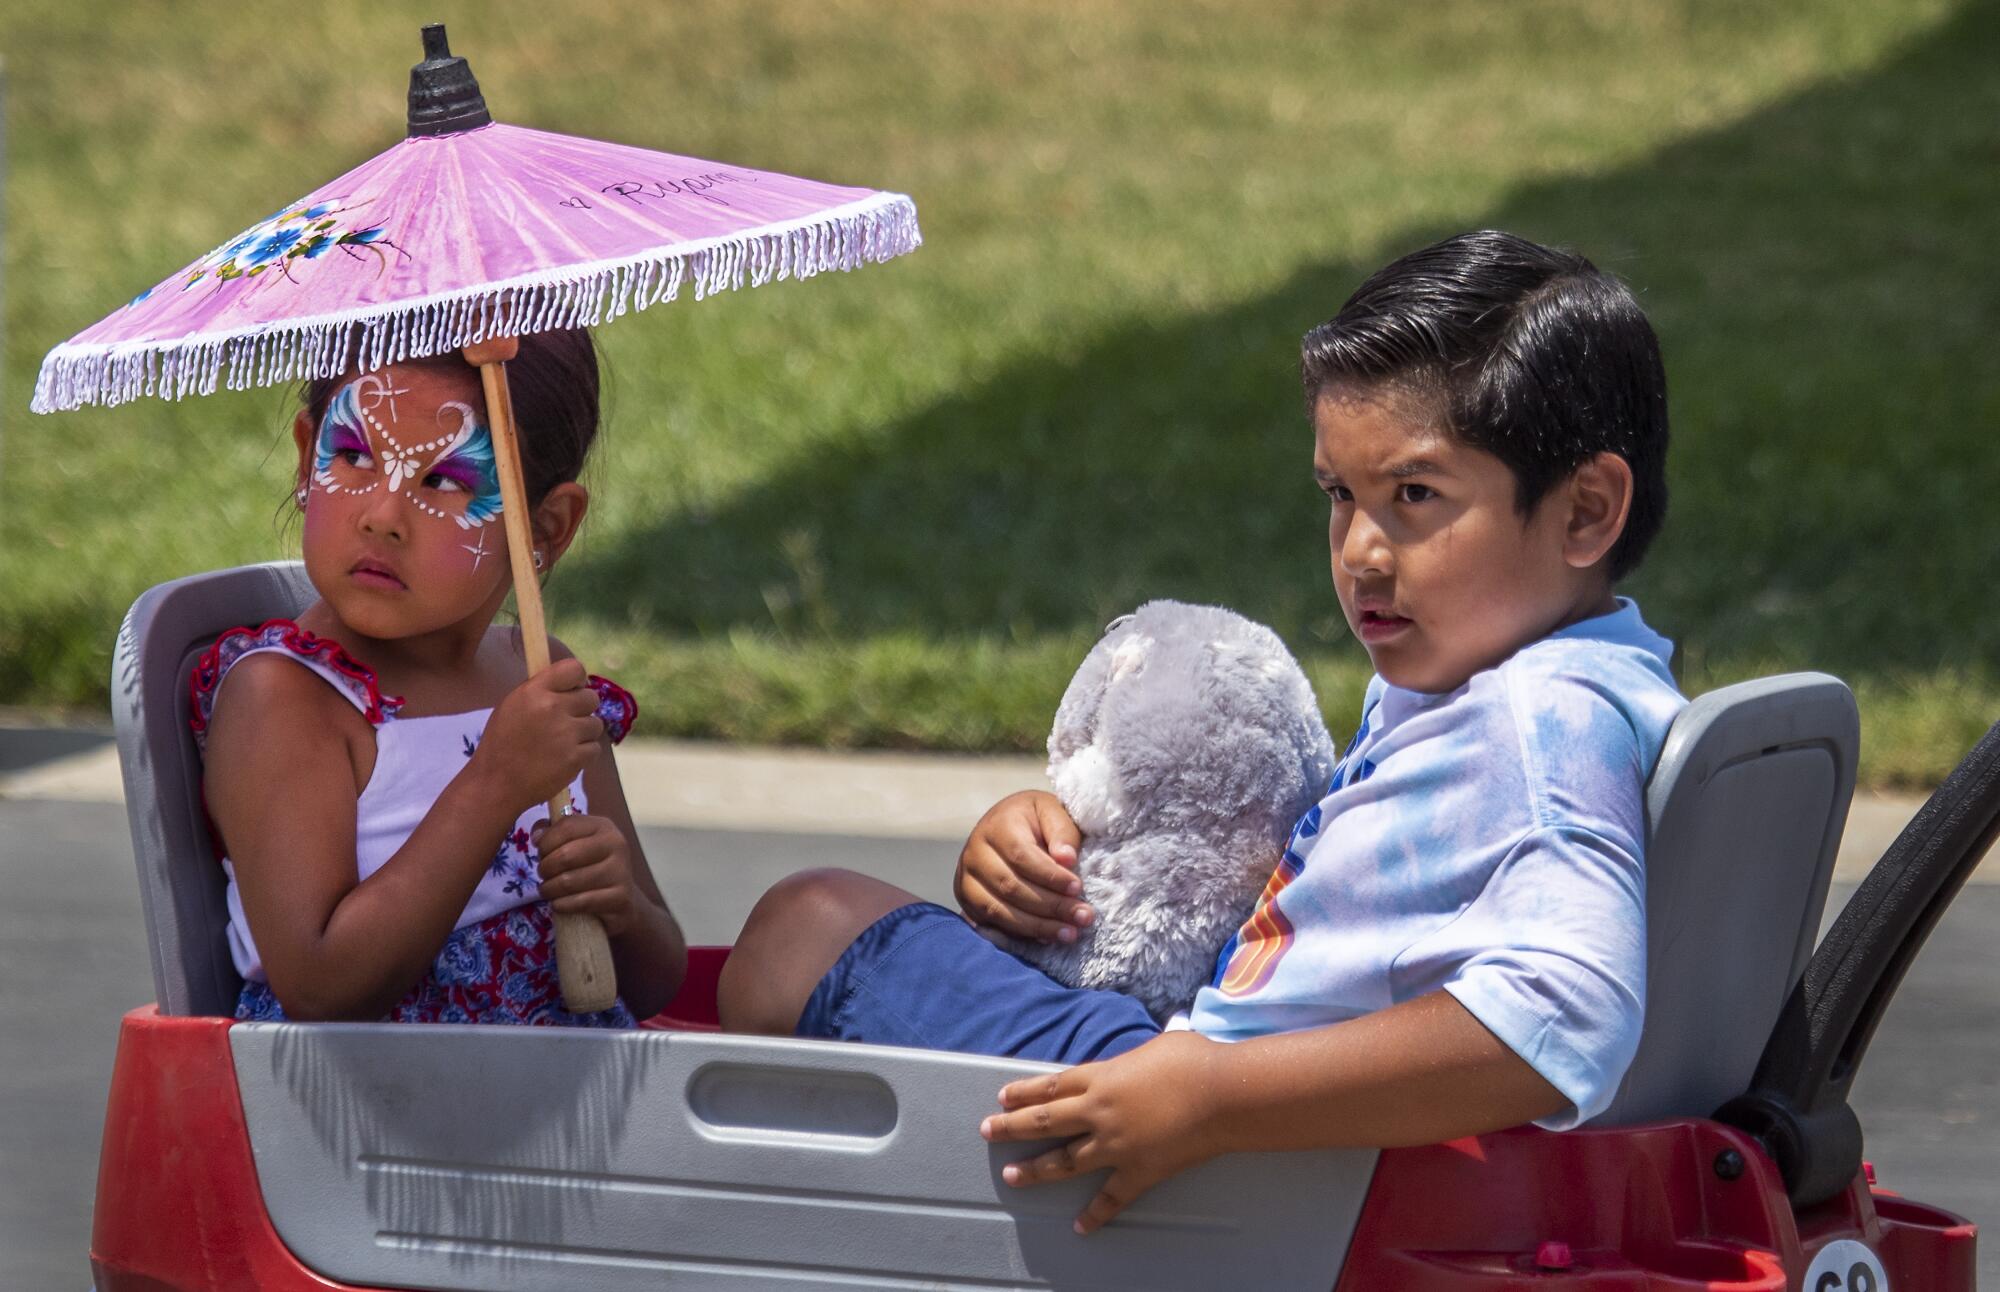 Ryann Garcia, 5, and Andrian Garcia, 8, of Los Alamitos, are pulled in a wagon.